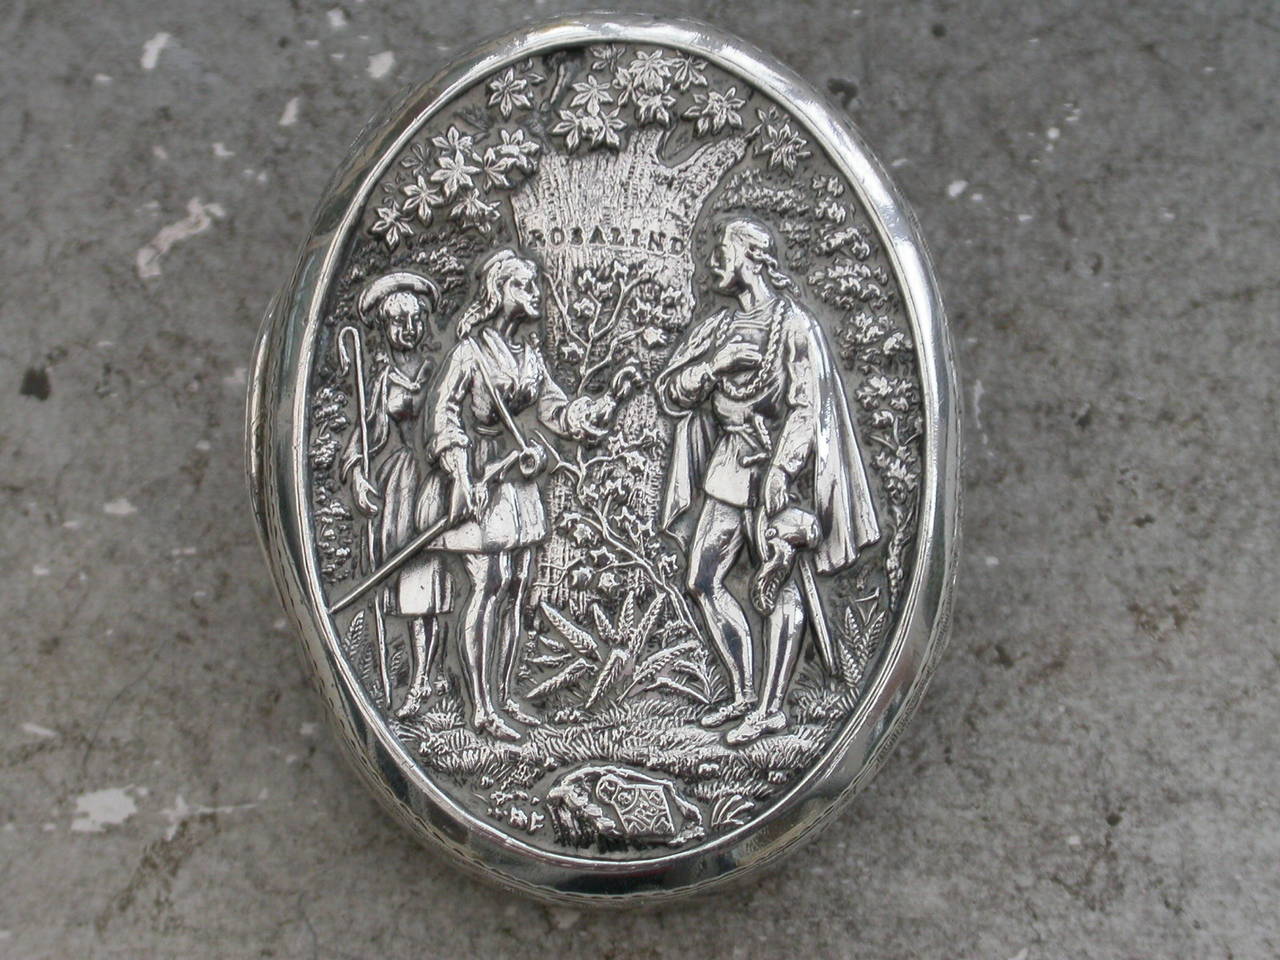 British Victorian Silver High Relief Vinaigrette from Shakespeare's 'As You Like It'